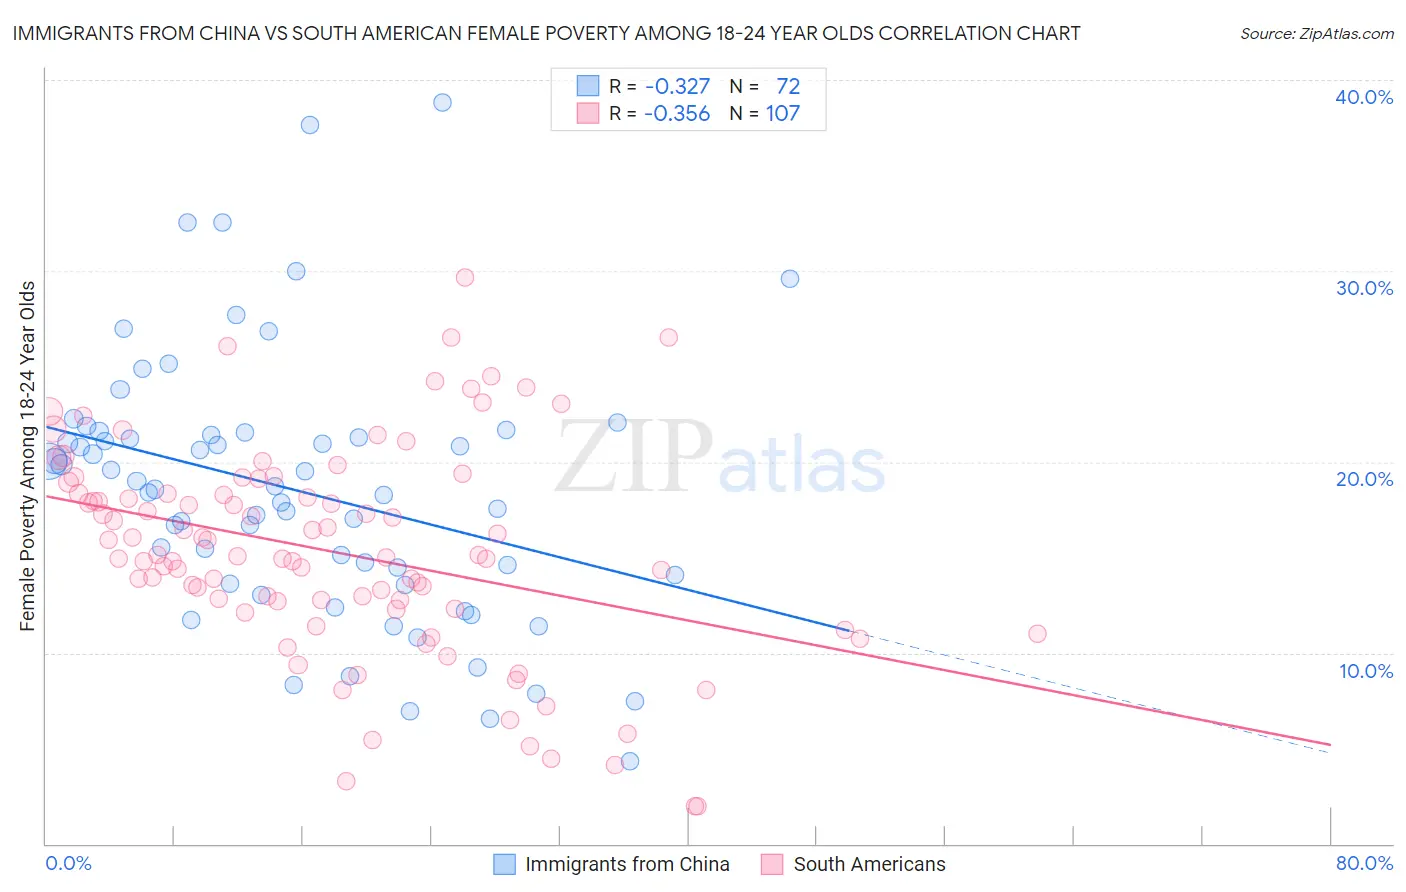 Immigrants from China vs South American Female Poverty Among 18-24 Year Olds